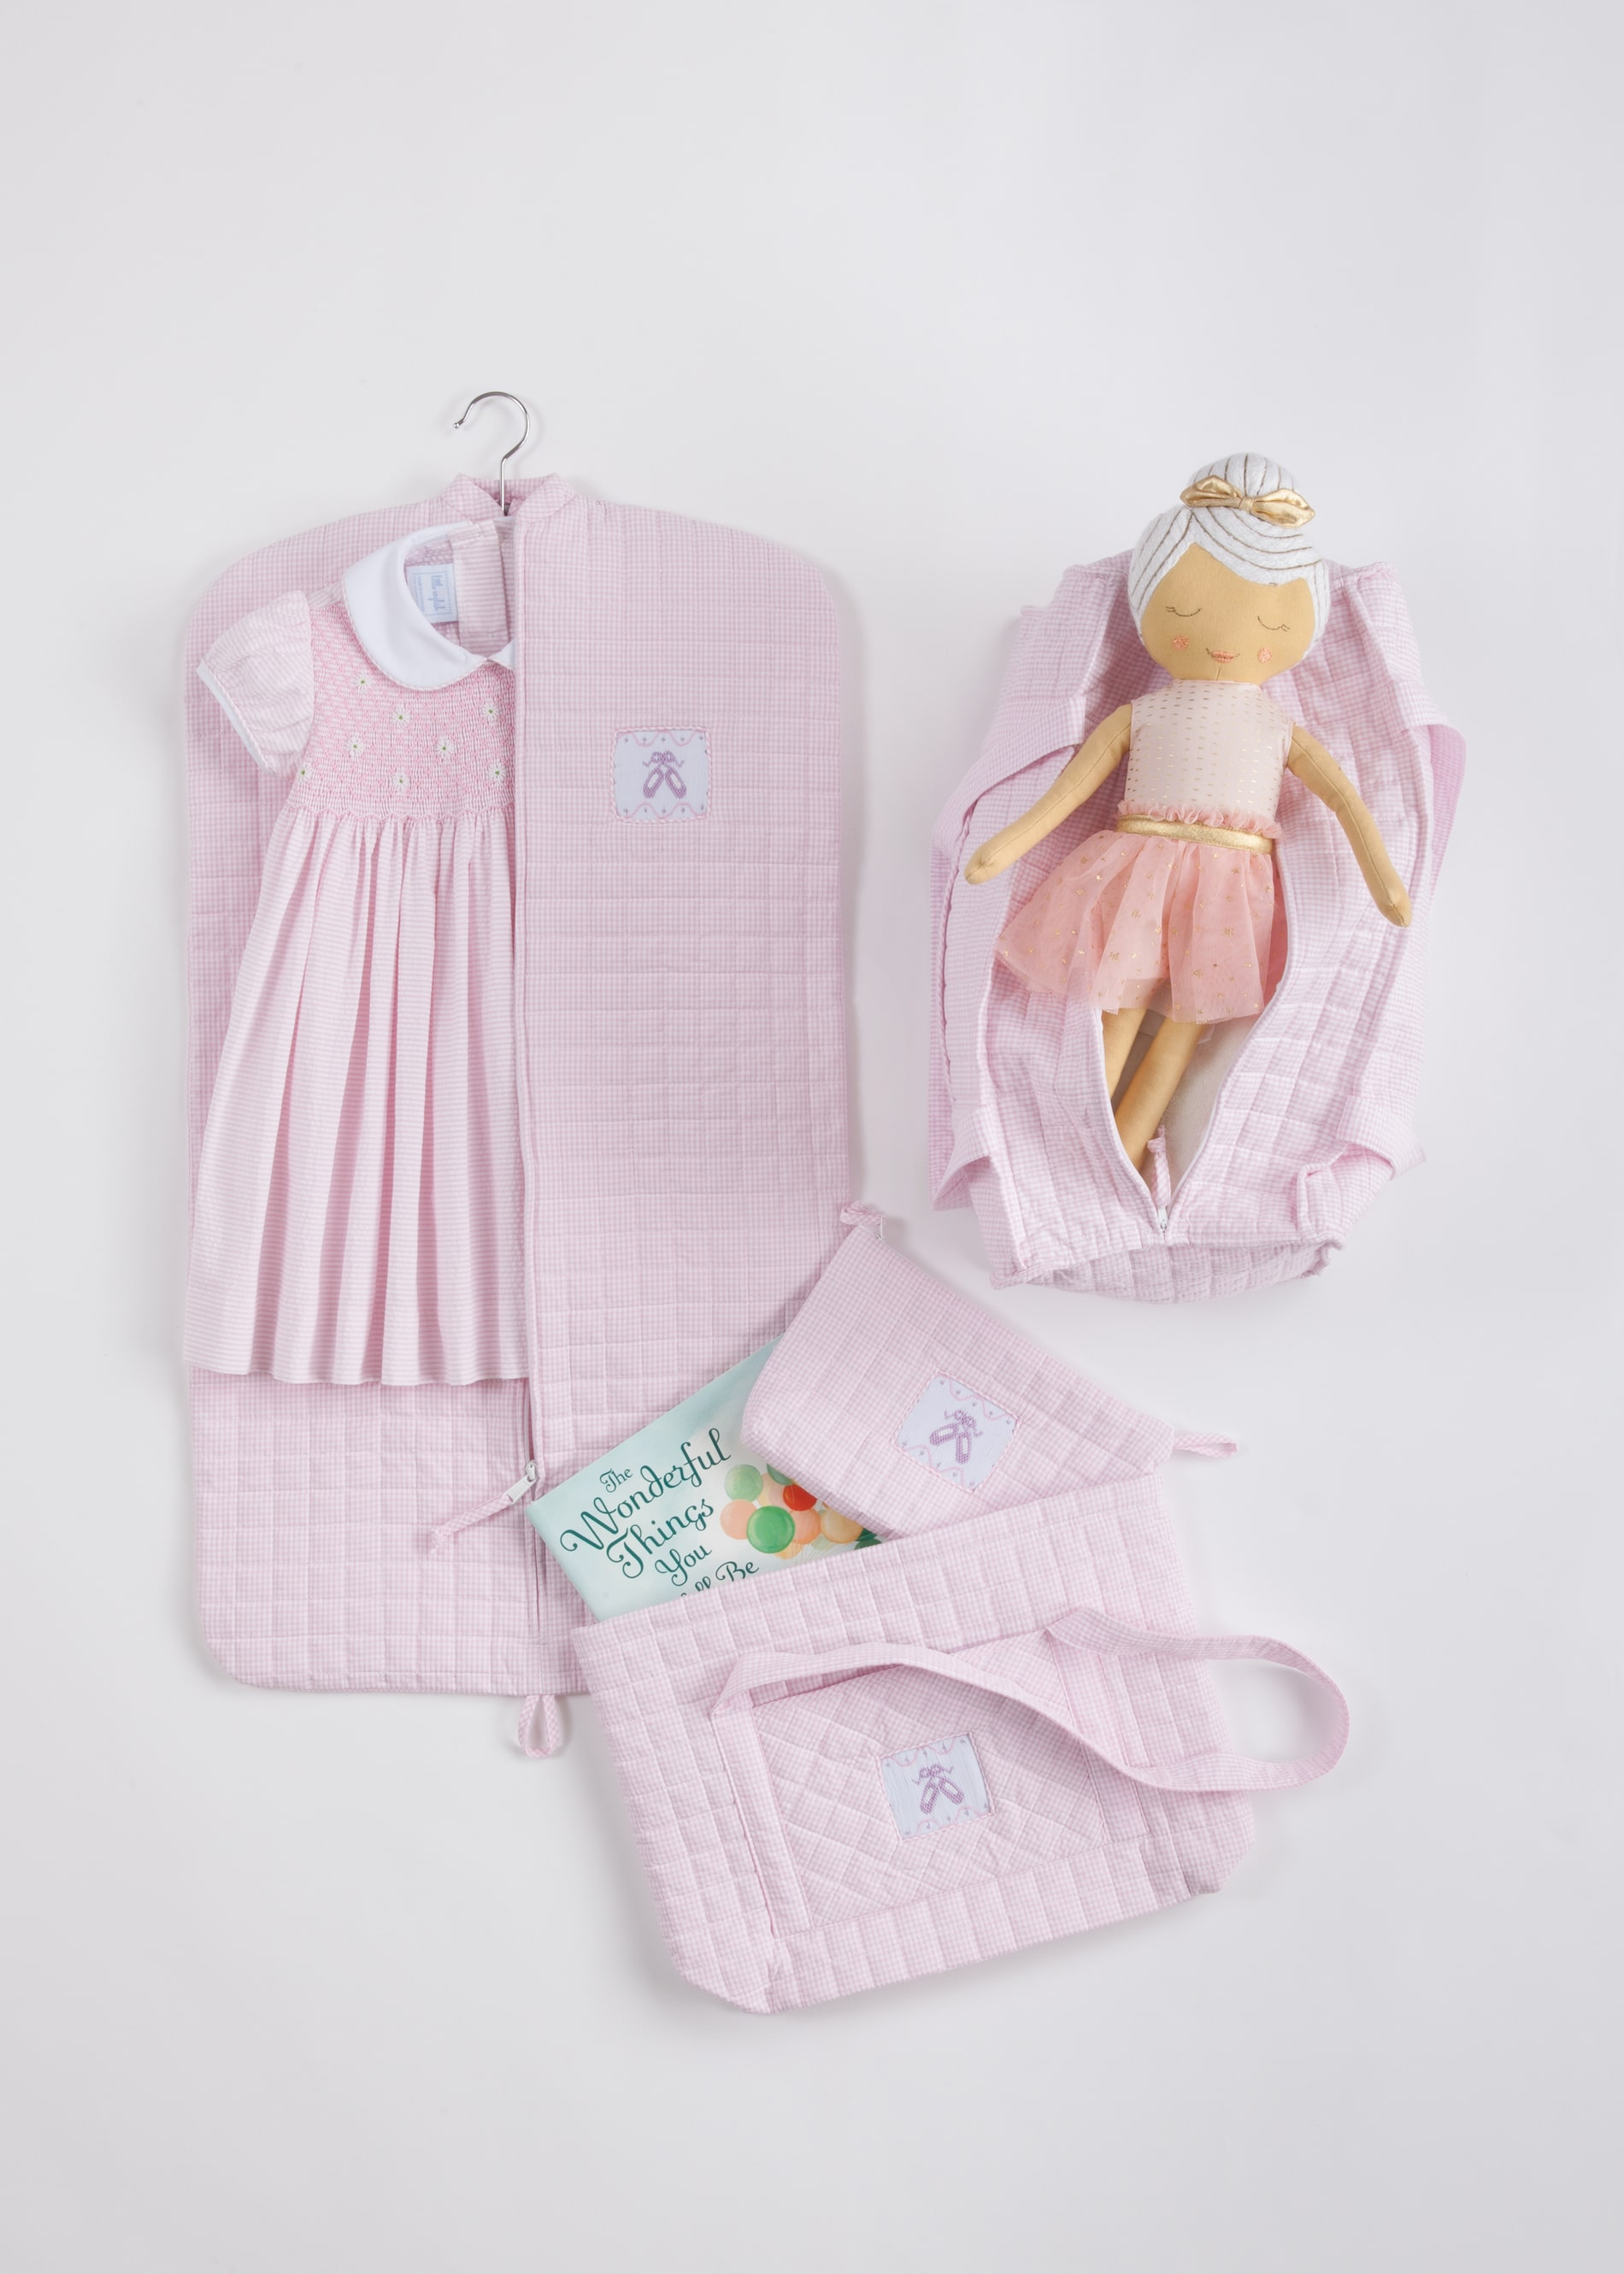 Frilly pink girl's dress and doll